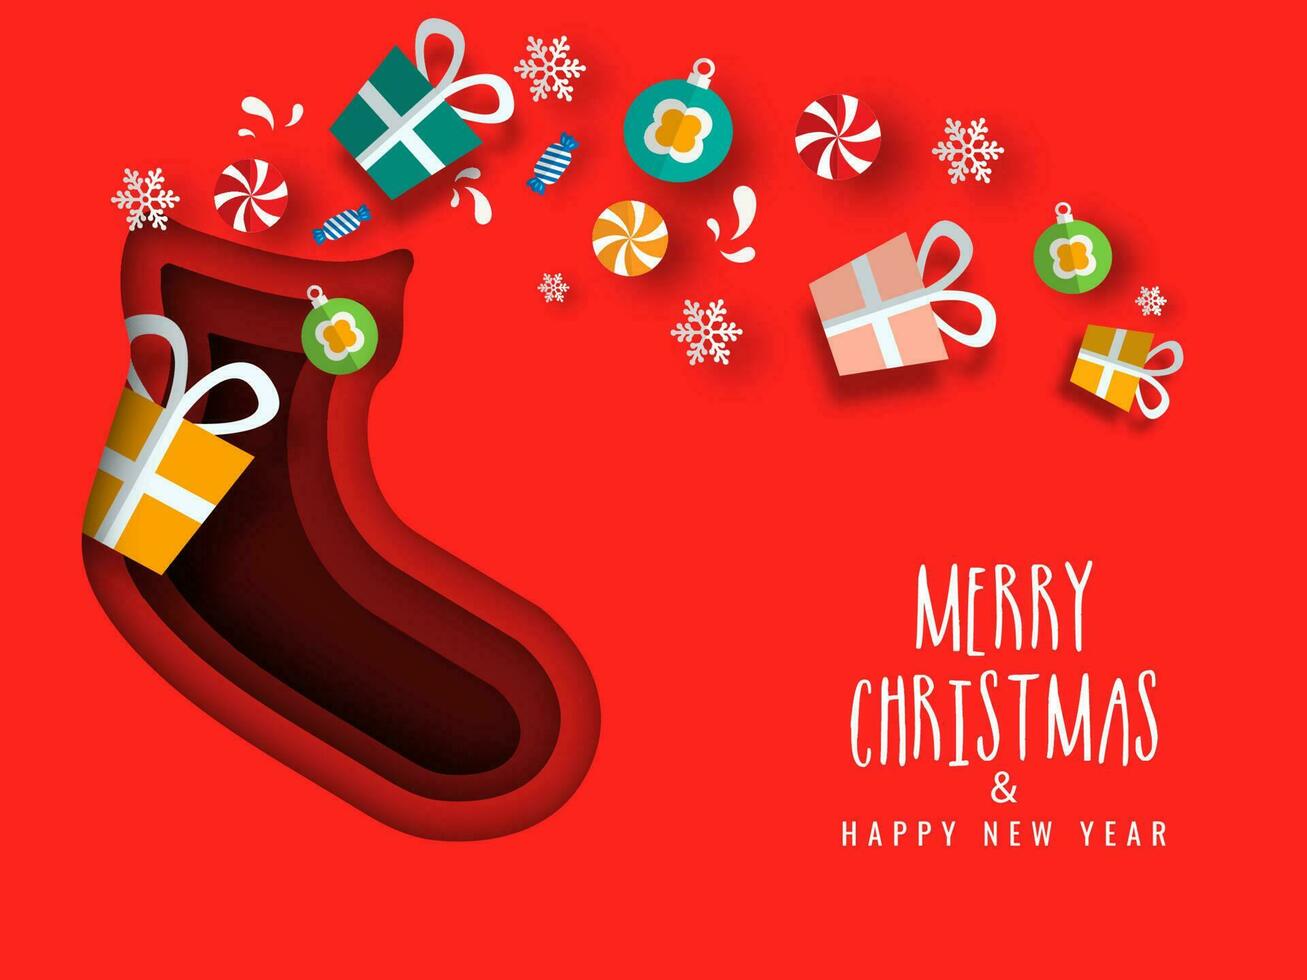 Merry Christmas and Happy New Year greeting card design with gift boxes, candy, baubles and snowflake decorated on red socks shape in paper cut style background. vector